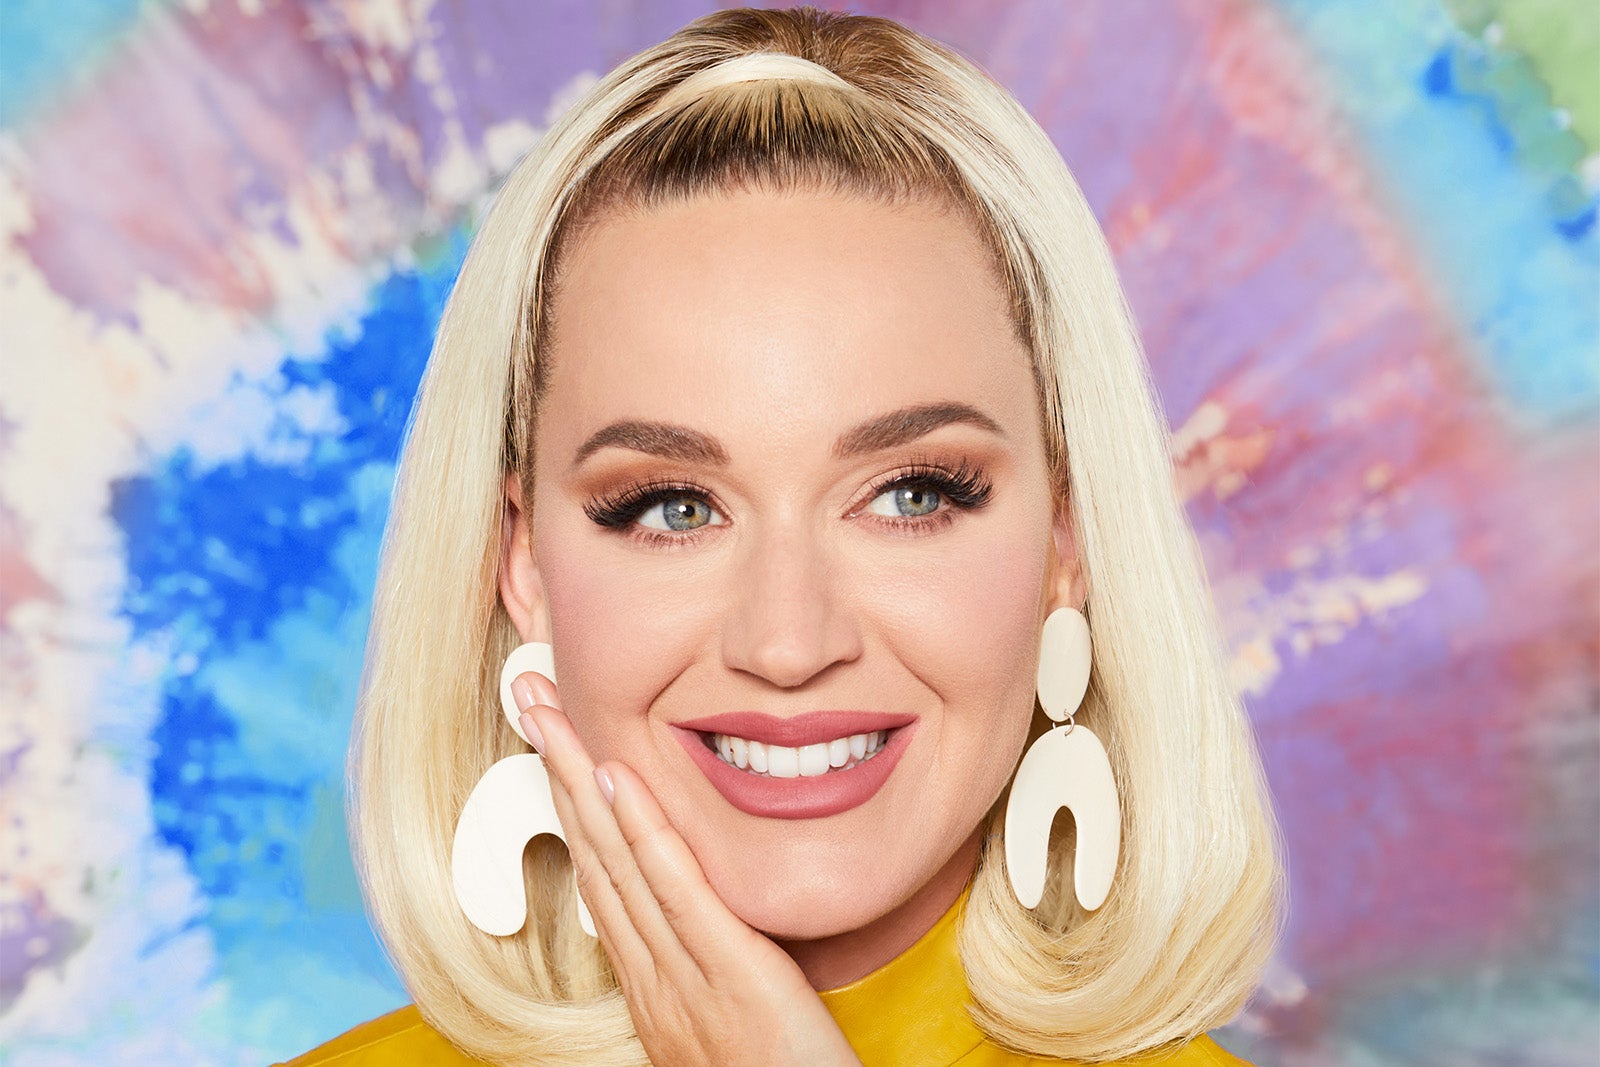 Photo of Katy Perry wearing large white earrings